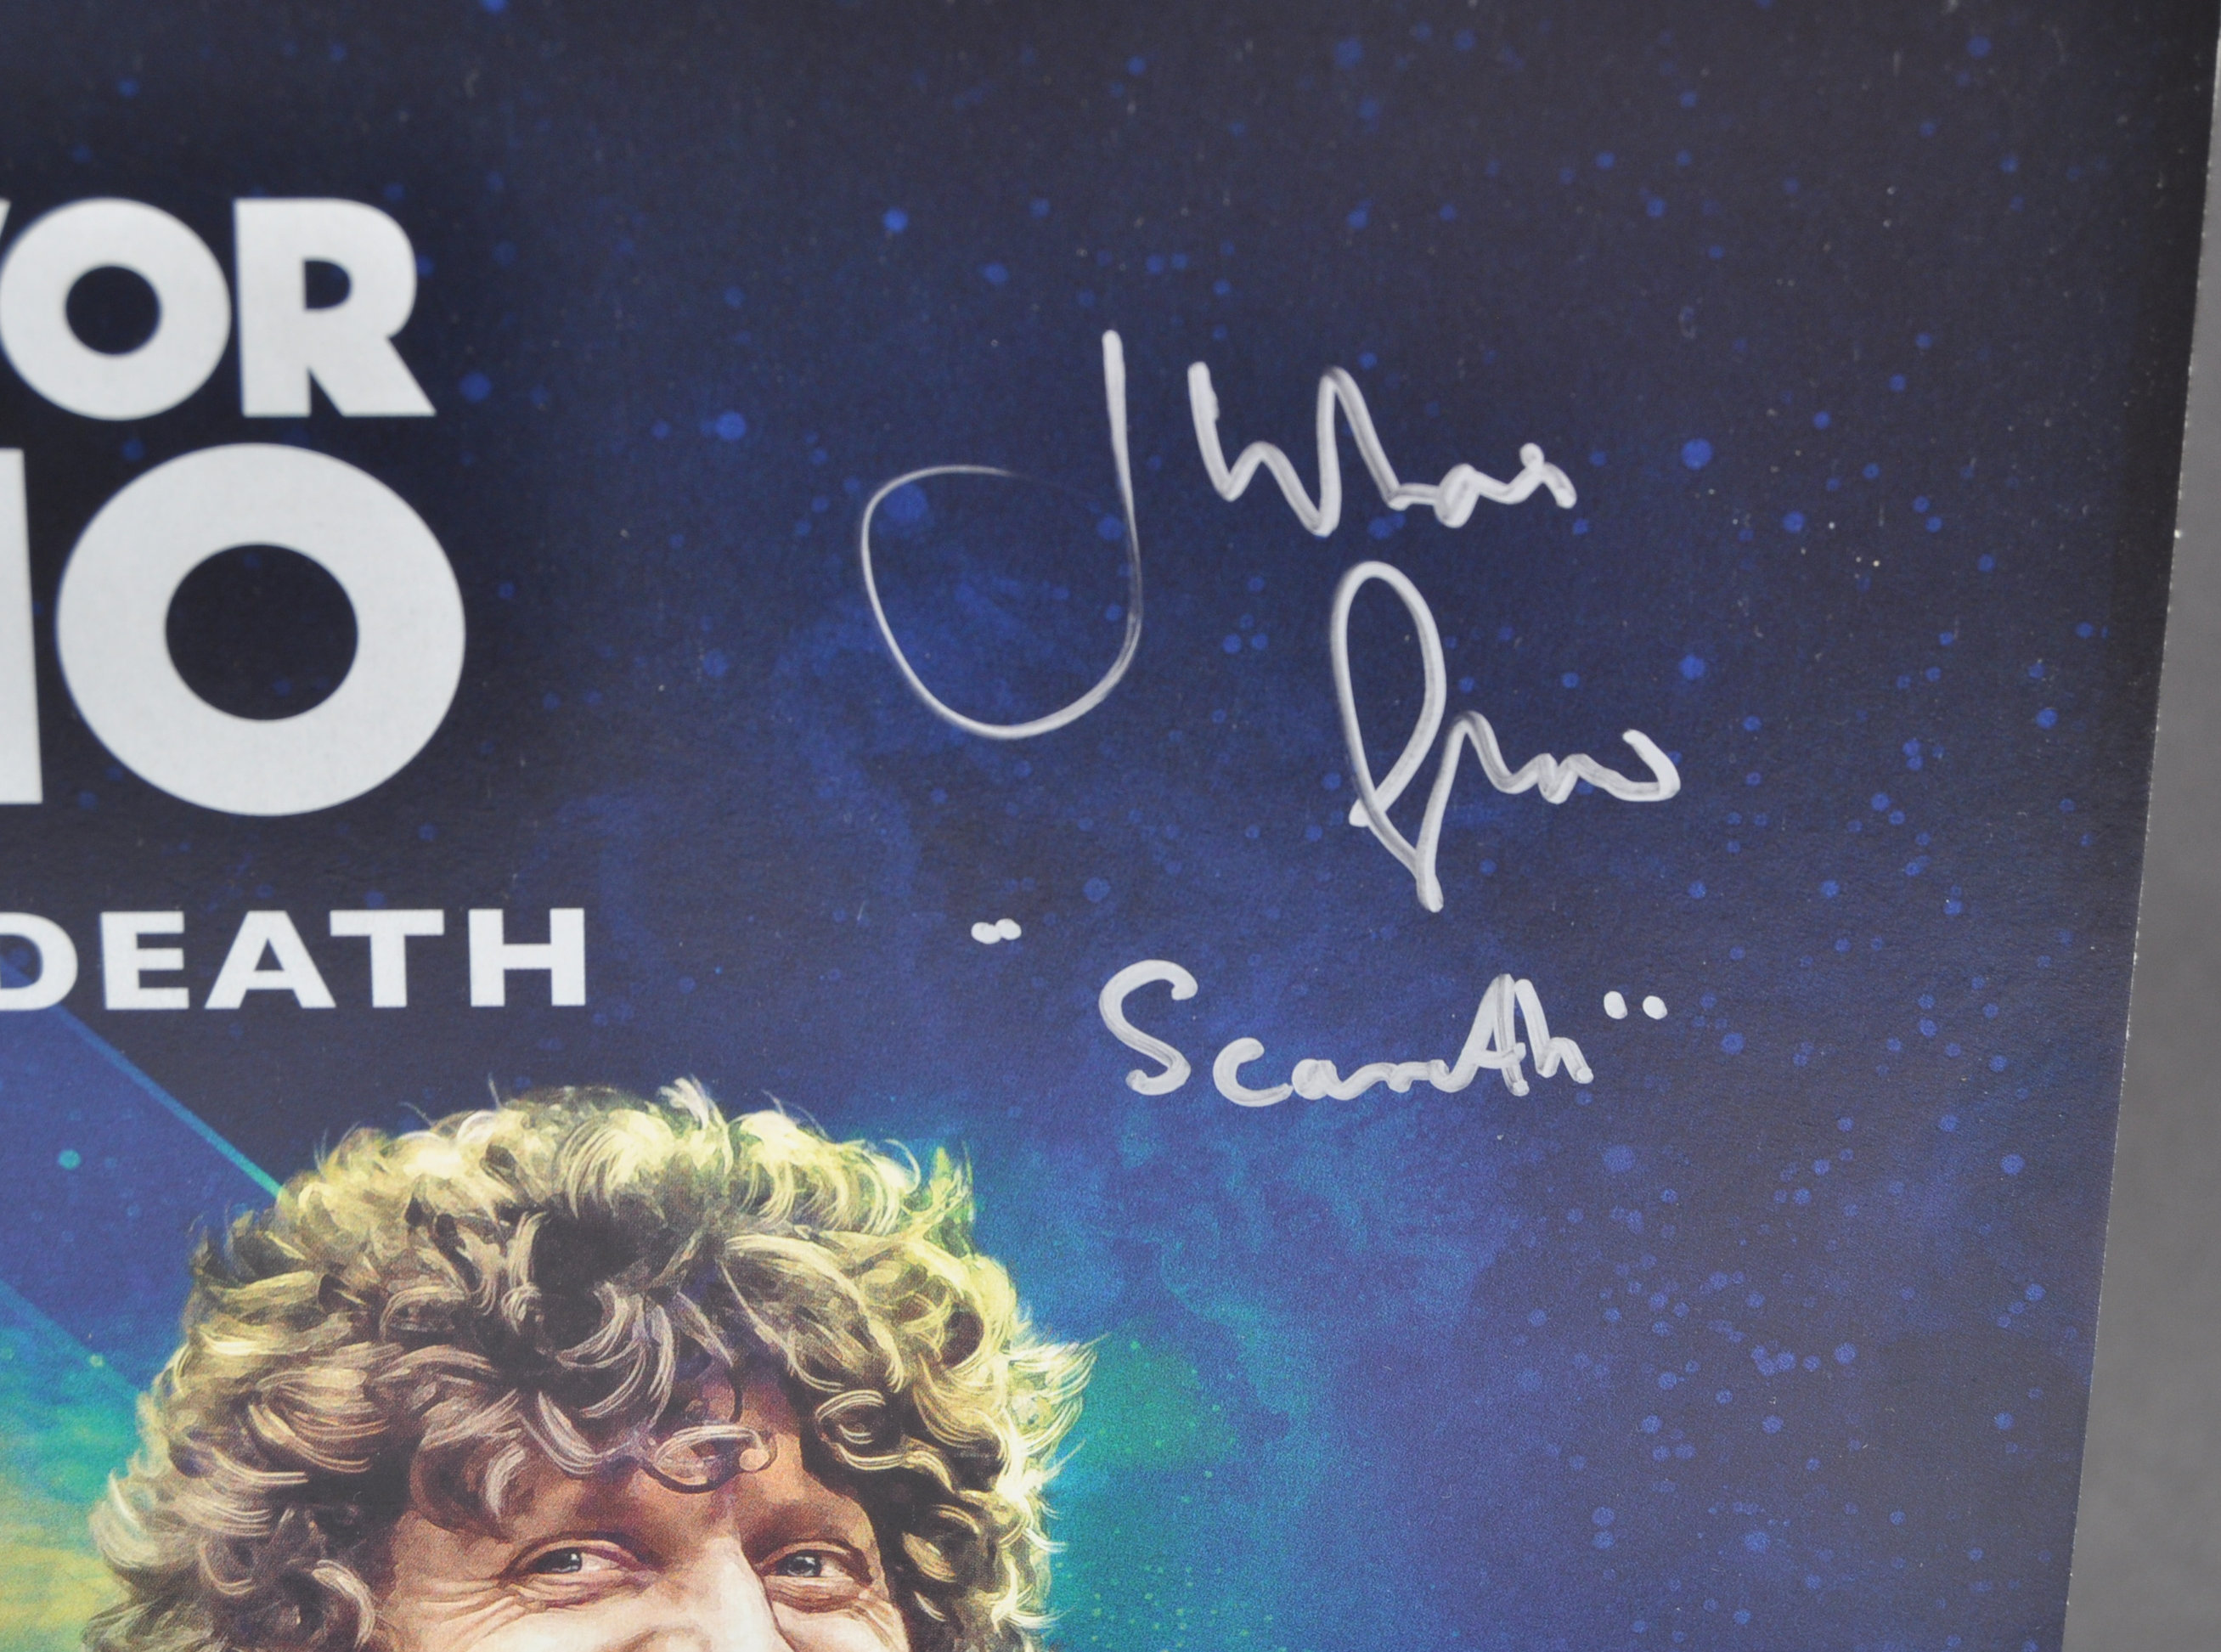 INCREDIBLE DOCTOR WHO CITY OF DEATH MULTI-SIGNED LP - Image 4 of 5